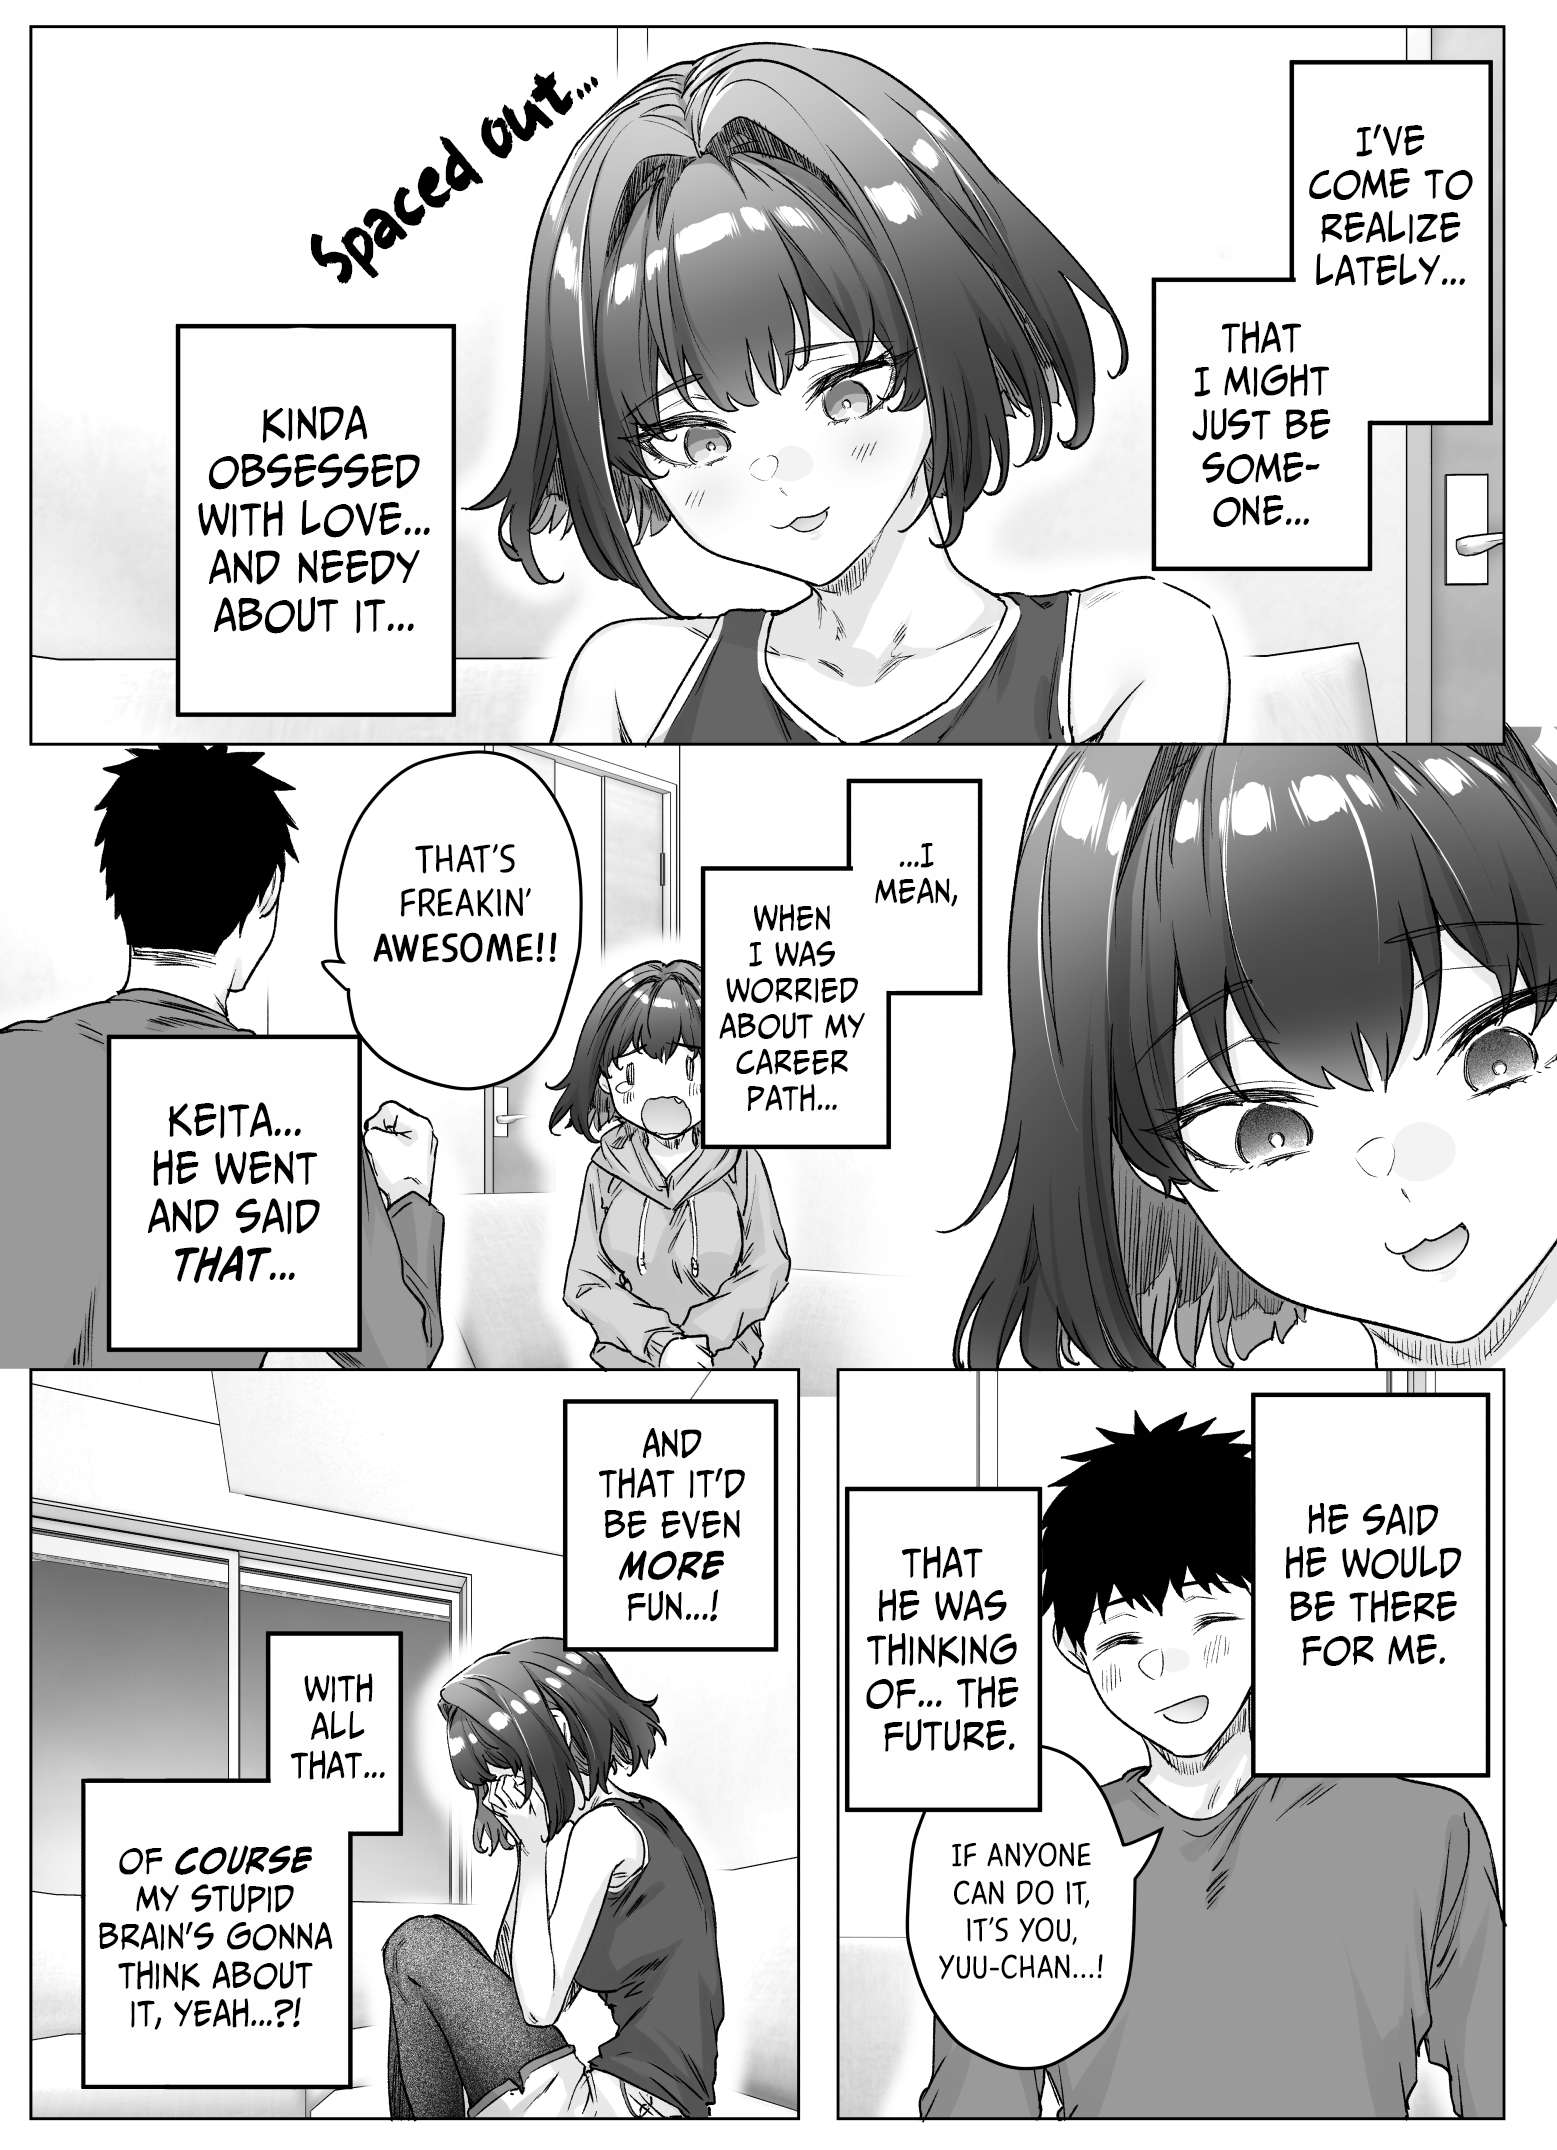 The Tsuntsuntsuntsuntsuntsuntsuntsuntsuntsuntsundere Girl Getting Less and Less Tsun Day by Day - chapter 98 - #1